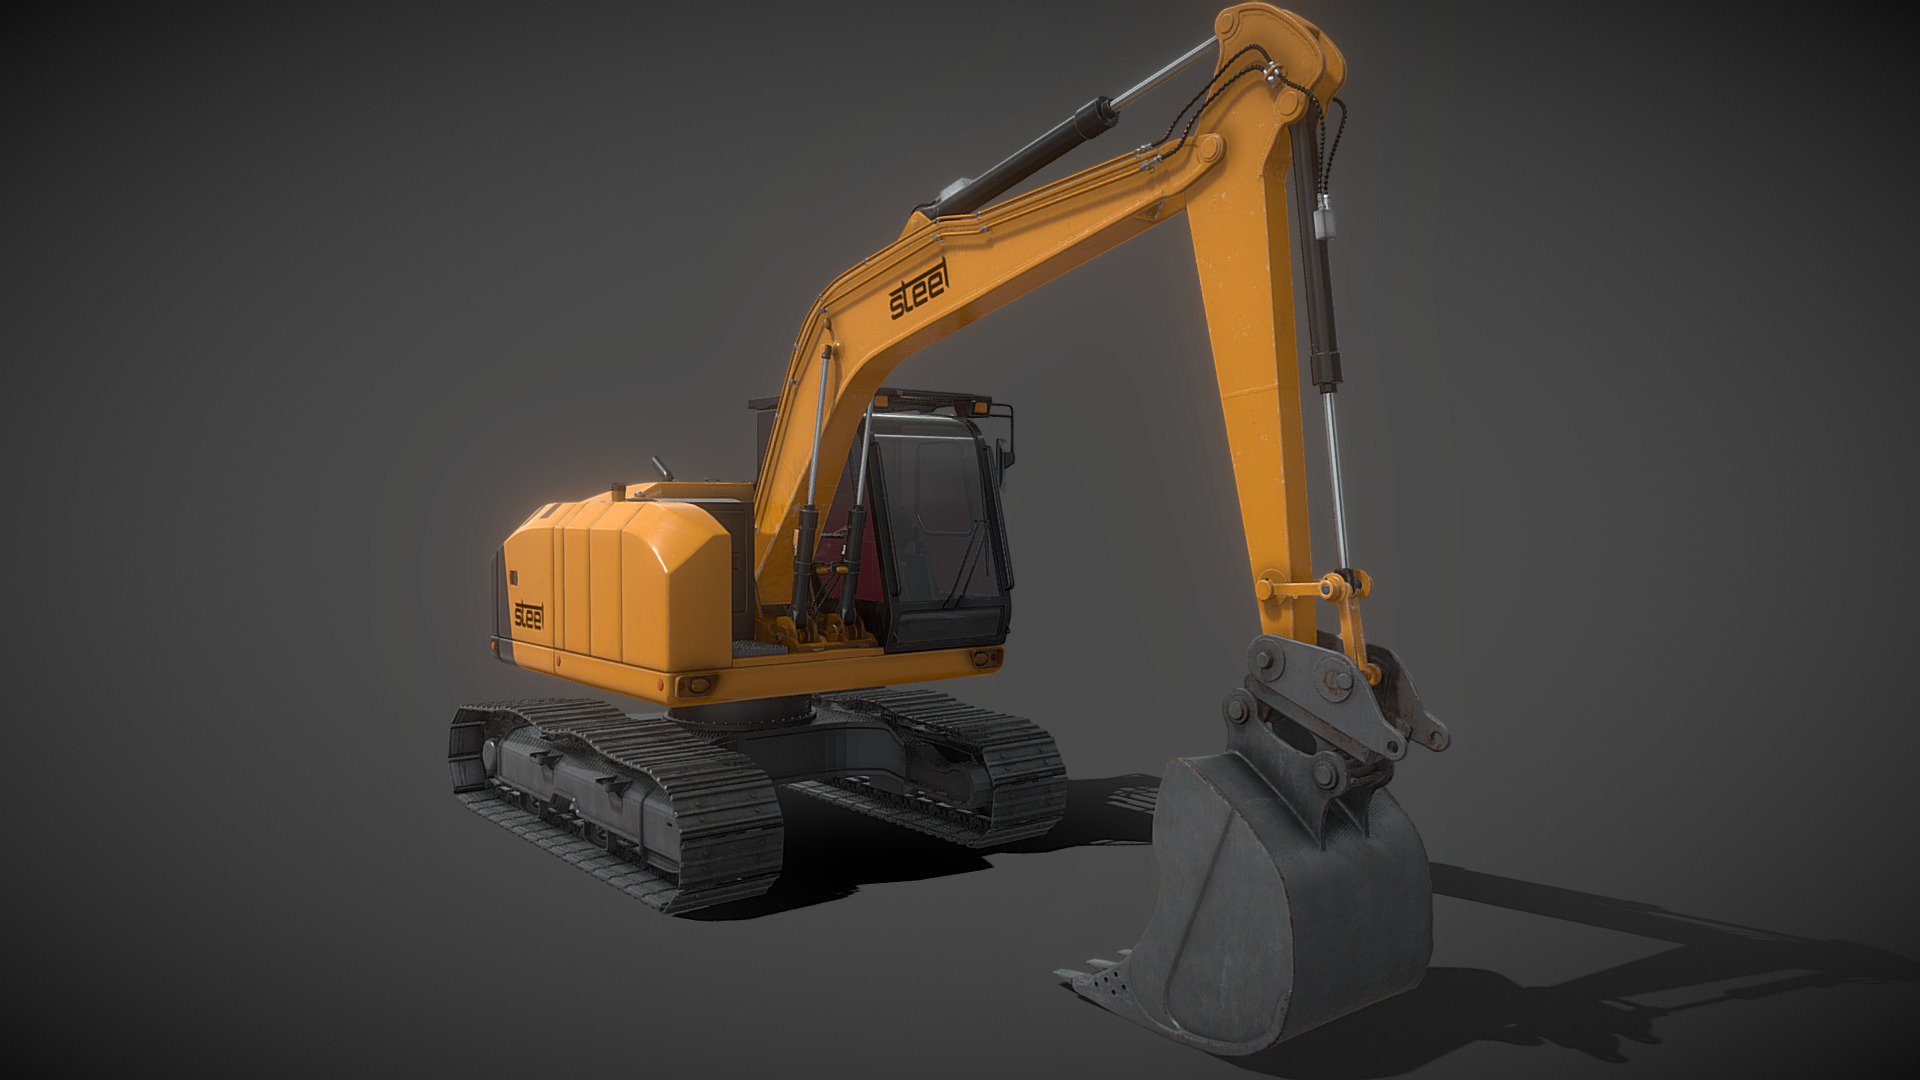 Excavators are popular earthmoving vehicles that feature a bucket, arm, rotating cab and movable tracks. These components provide superior digging power and mobility, allowing this heavy equipment to perform a variety of functions, from digging trenches and breaking holes to lifting away waste and excavating mines 3d model